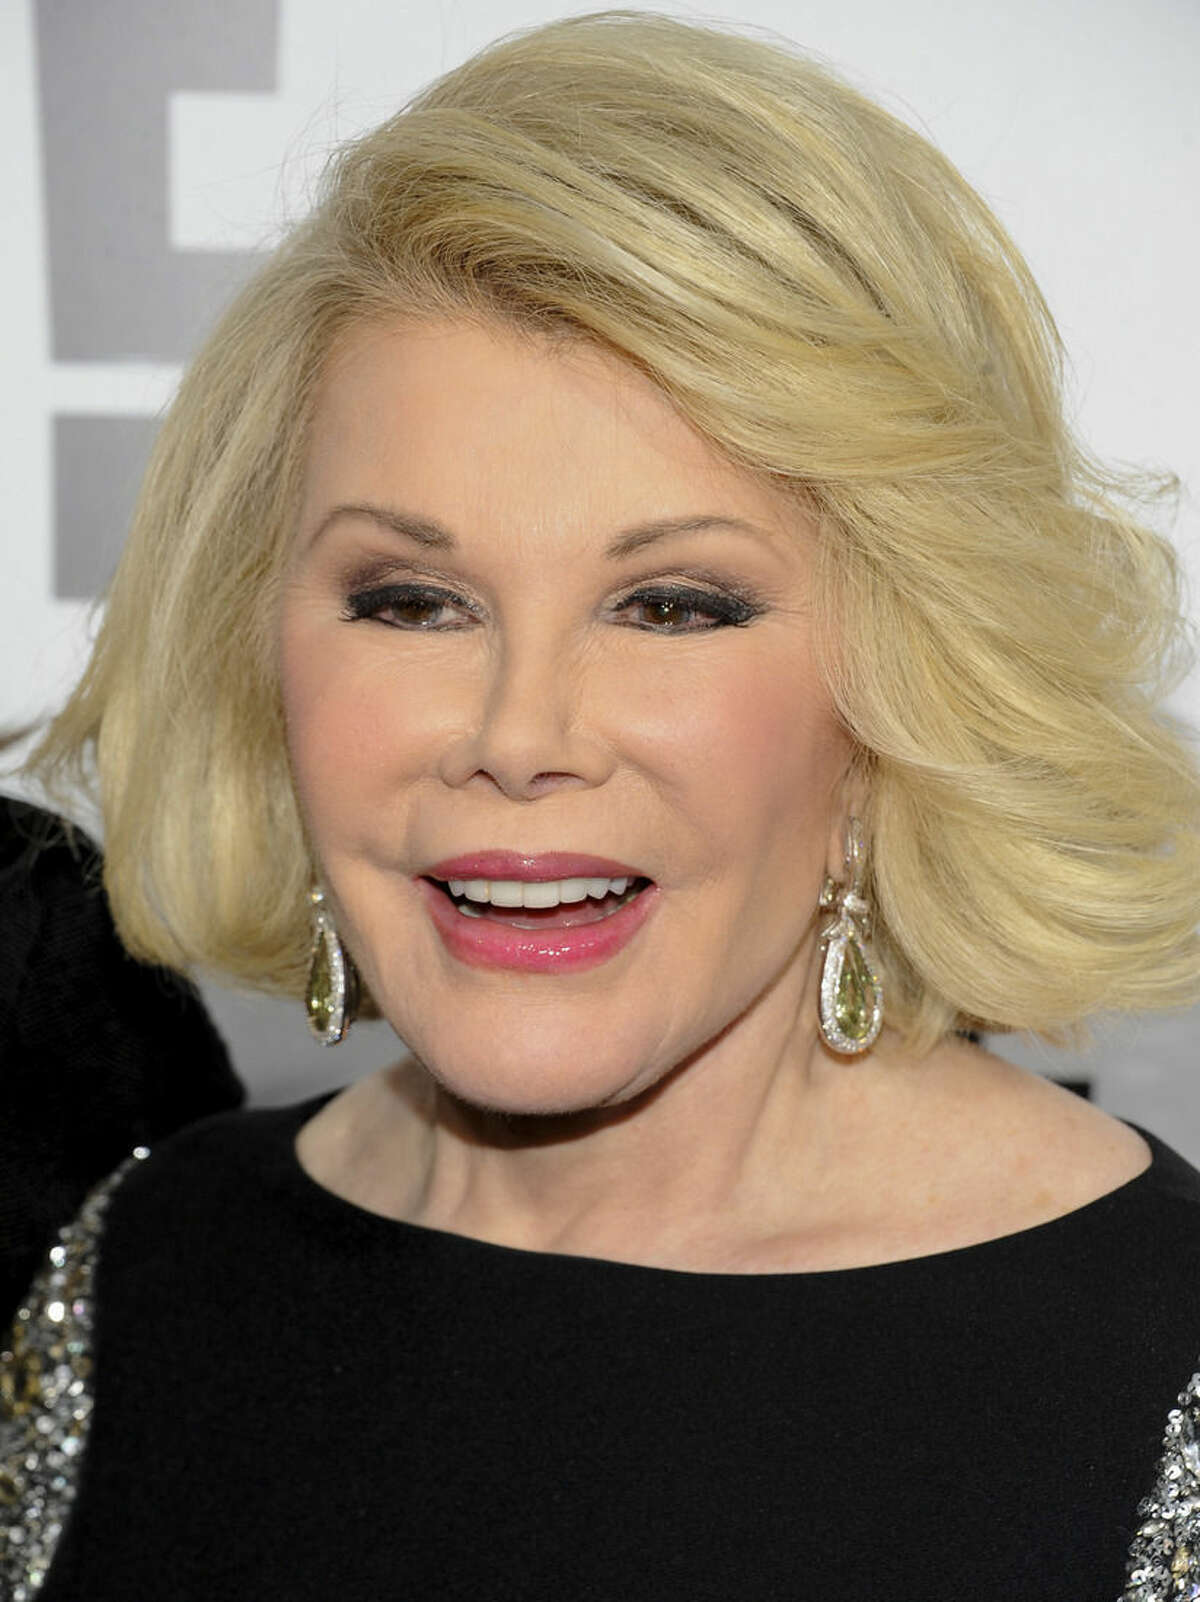 FILE - In this April 30, 2012 file photo, Joan Rivers attends an E! Network event in New York. Joan Rivers' family is confirmed Tuesday, Sept. 2, 2014 that the comic is on life support after going into cardiac arrest last week during a procedure at a doctor's office. Her daughter, Melissa Rivers, said in a statement Tuesday that her mother is on life support "at this time.?” Melissa said the family is extremely grateful for the public support. (AP Photo/Evan Agostini, File)